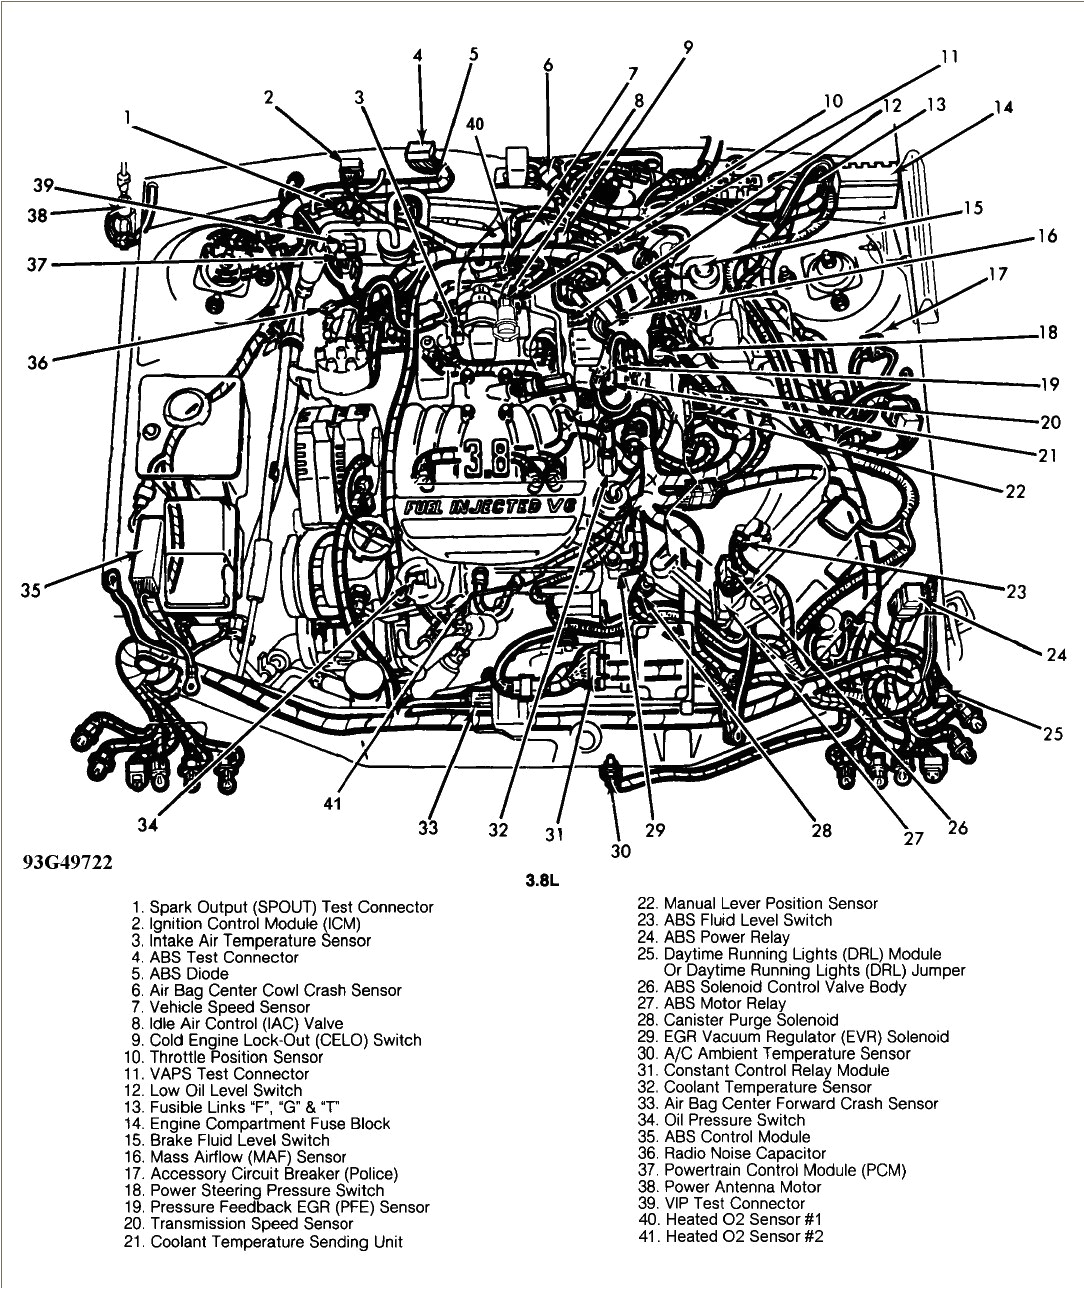 2004 ford taurus wiring diagram with 2013 04 01 105858 2006 05 with regard to 1999 ford taurus fuse box diagram jpg